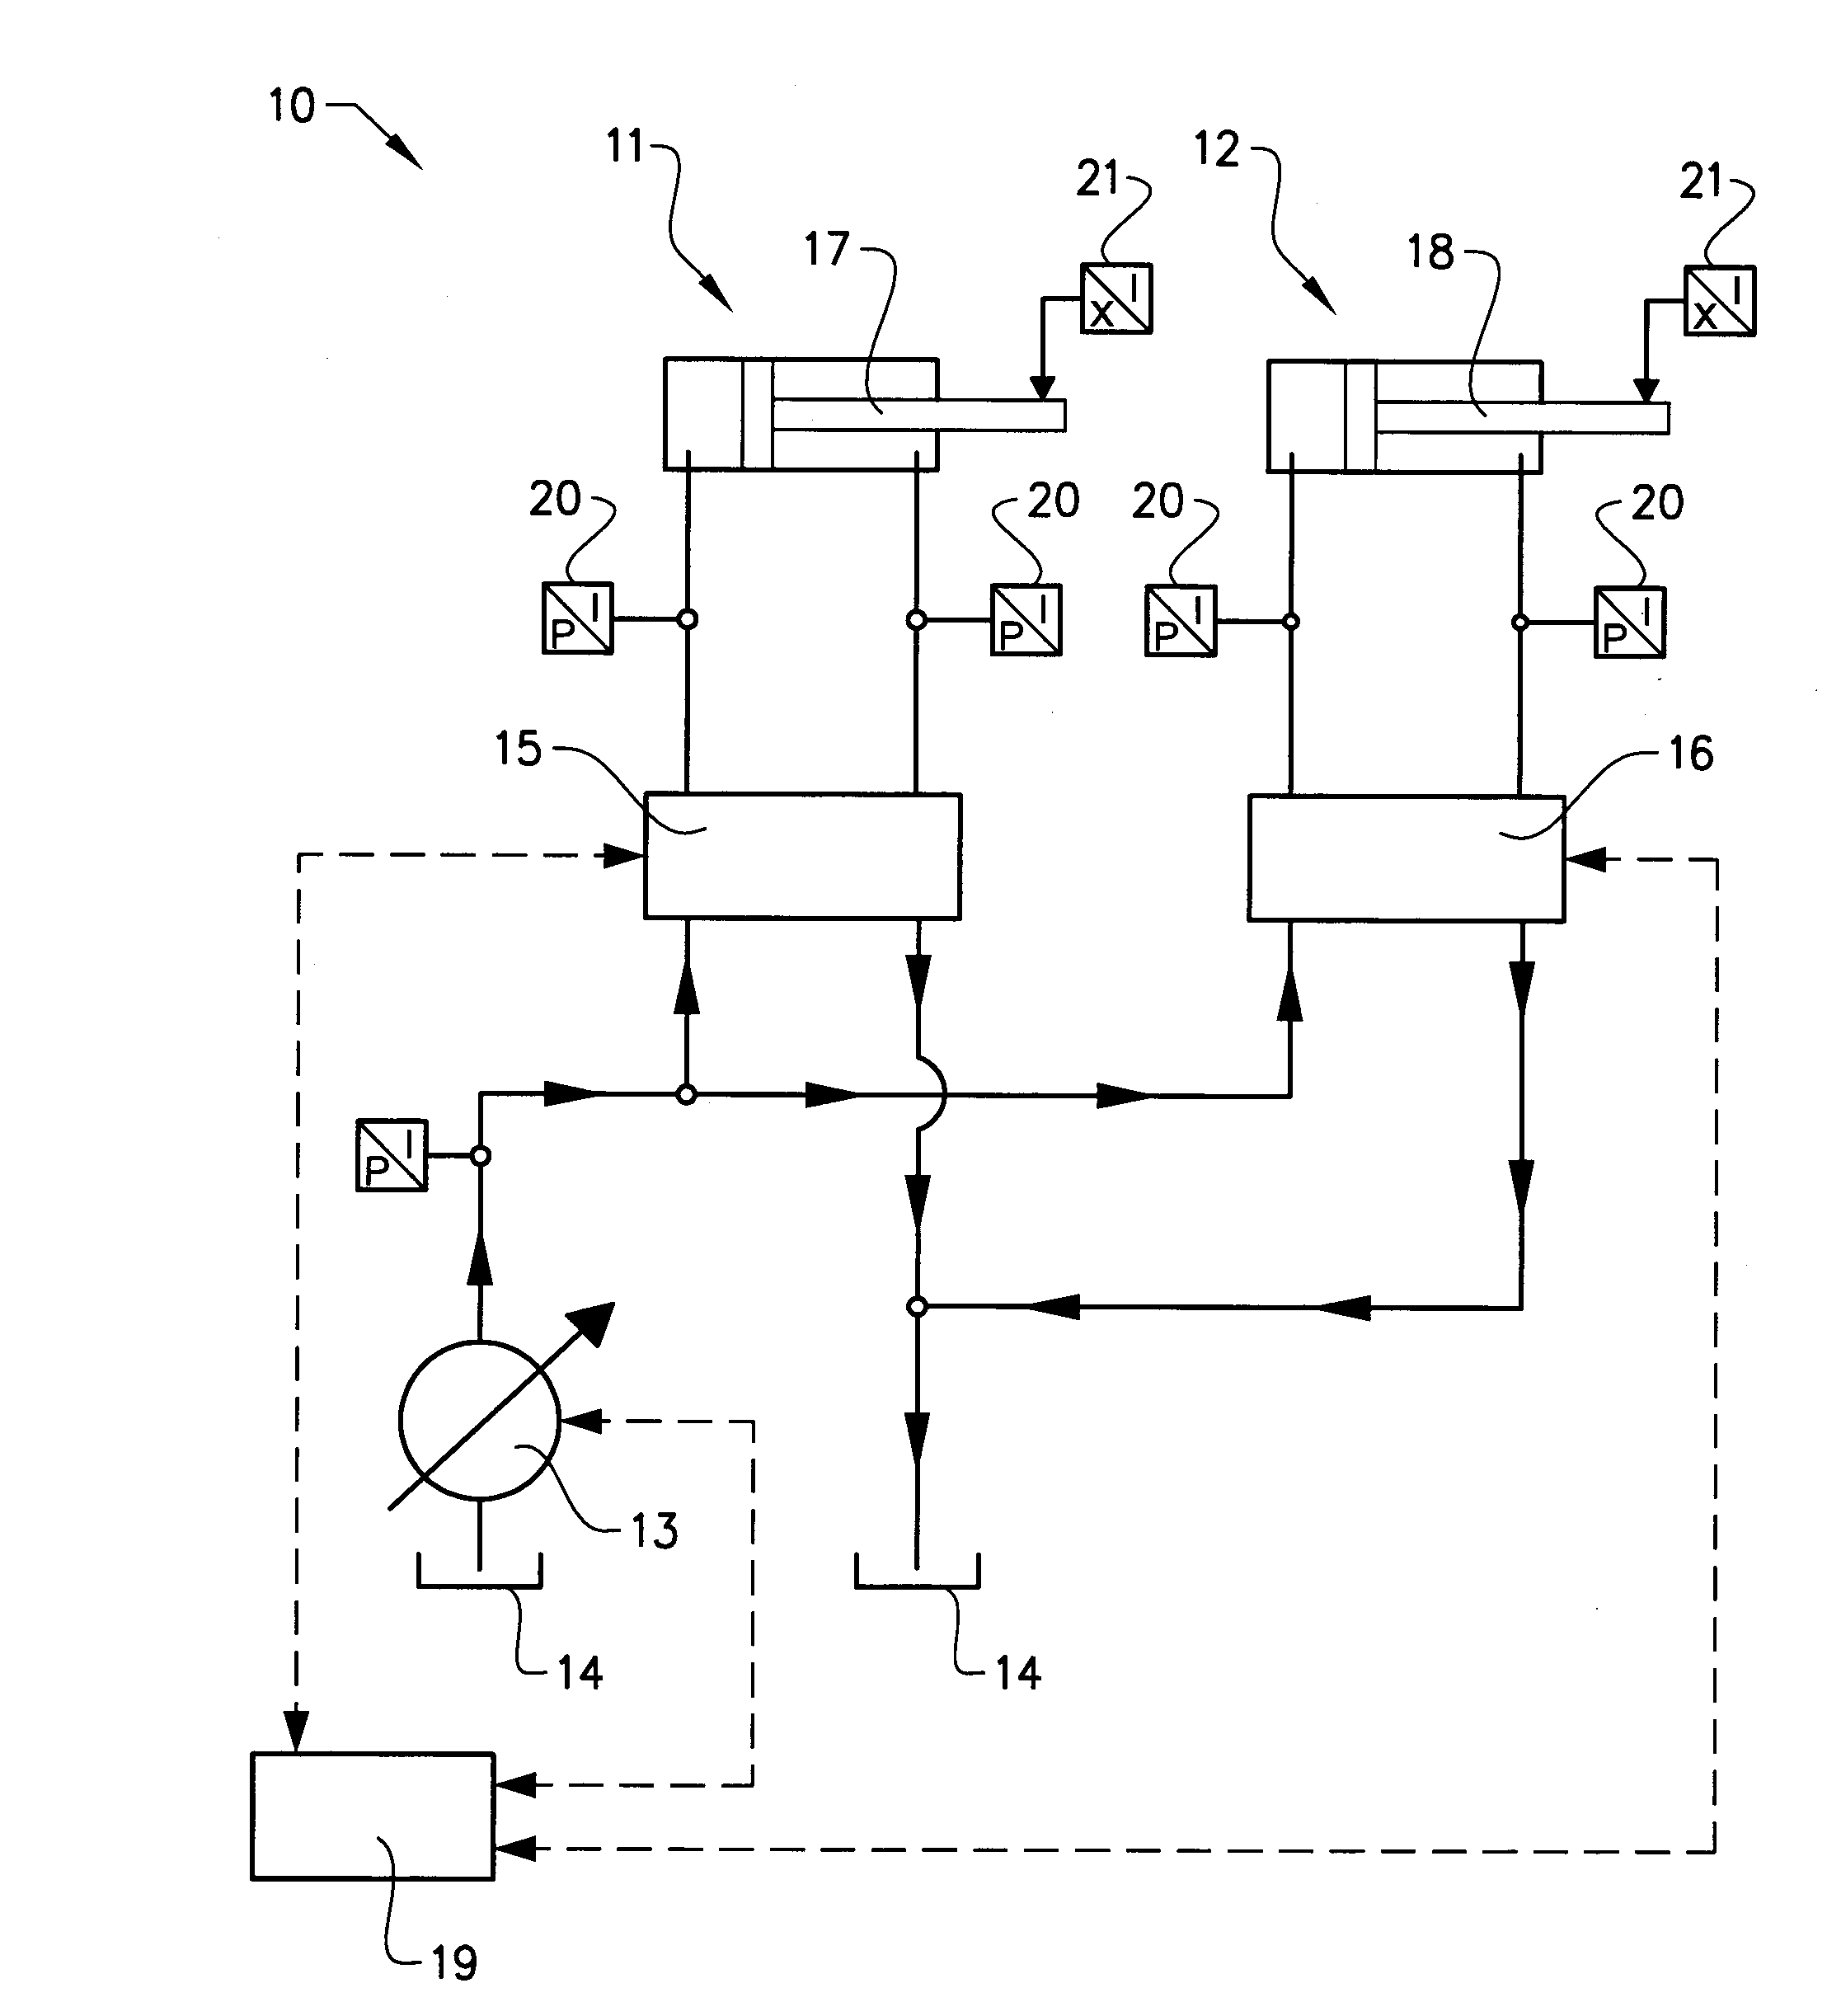 Method for controlling a hydraulic system of a working machine